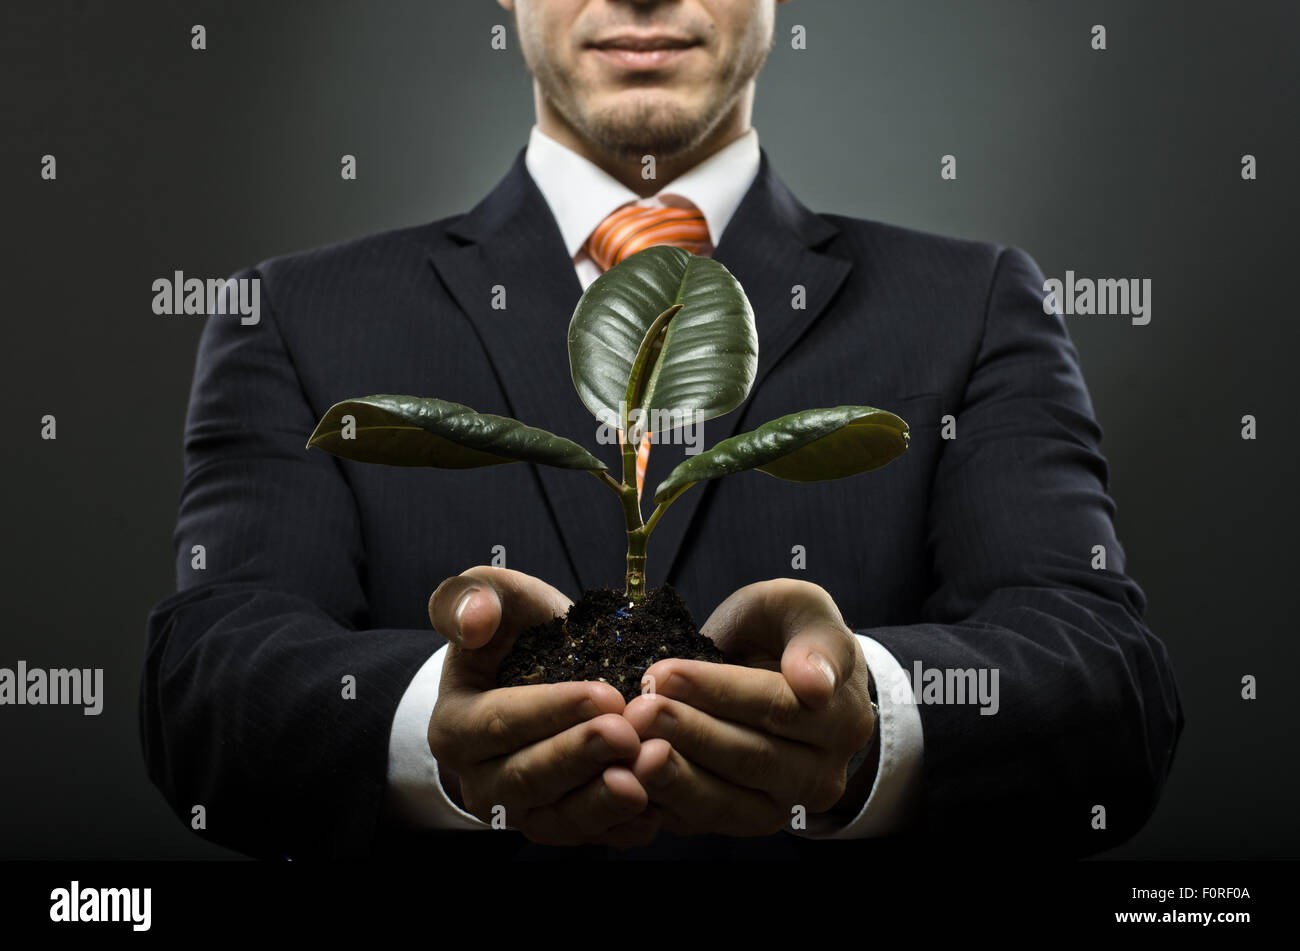 human hands  close  with  scion  rubber plant, business concept Stock Photo